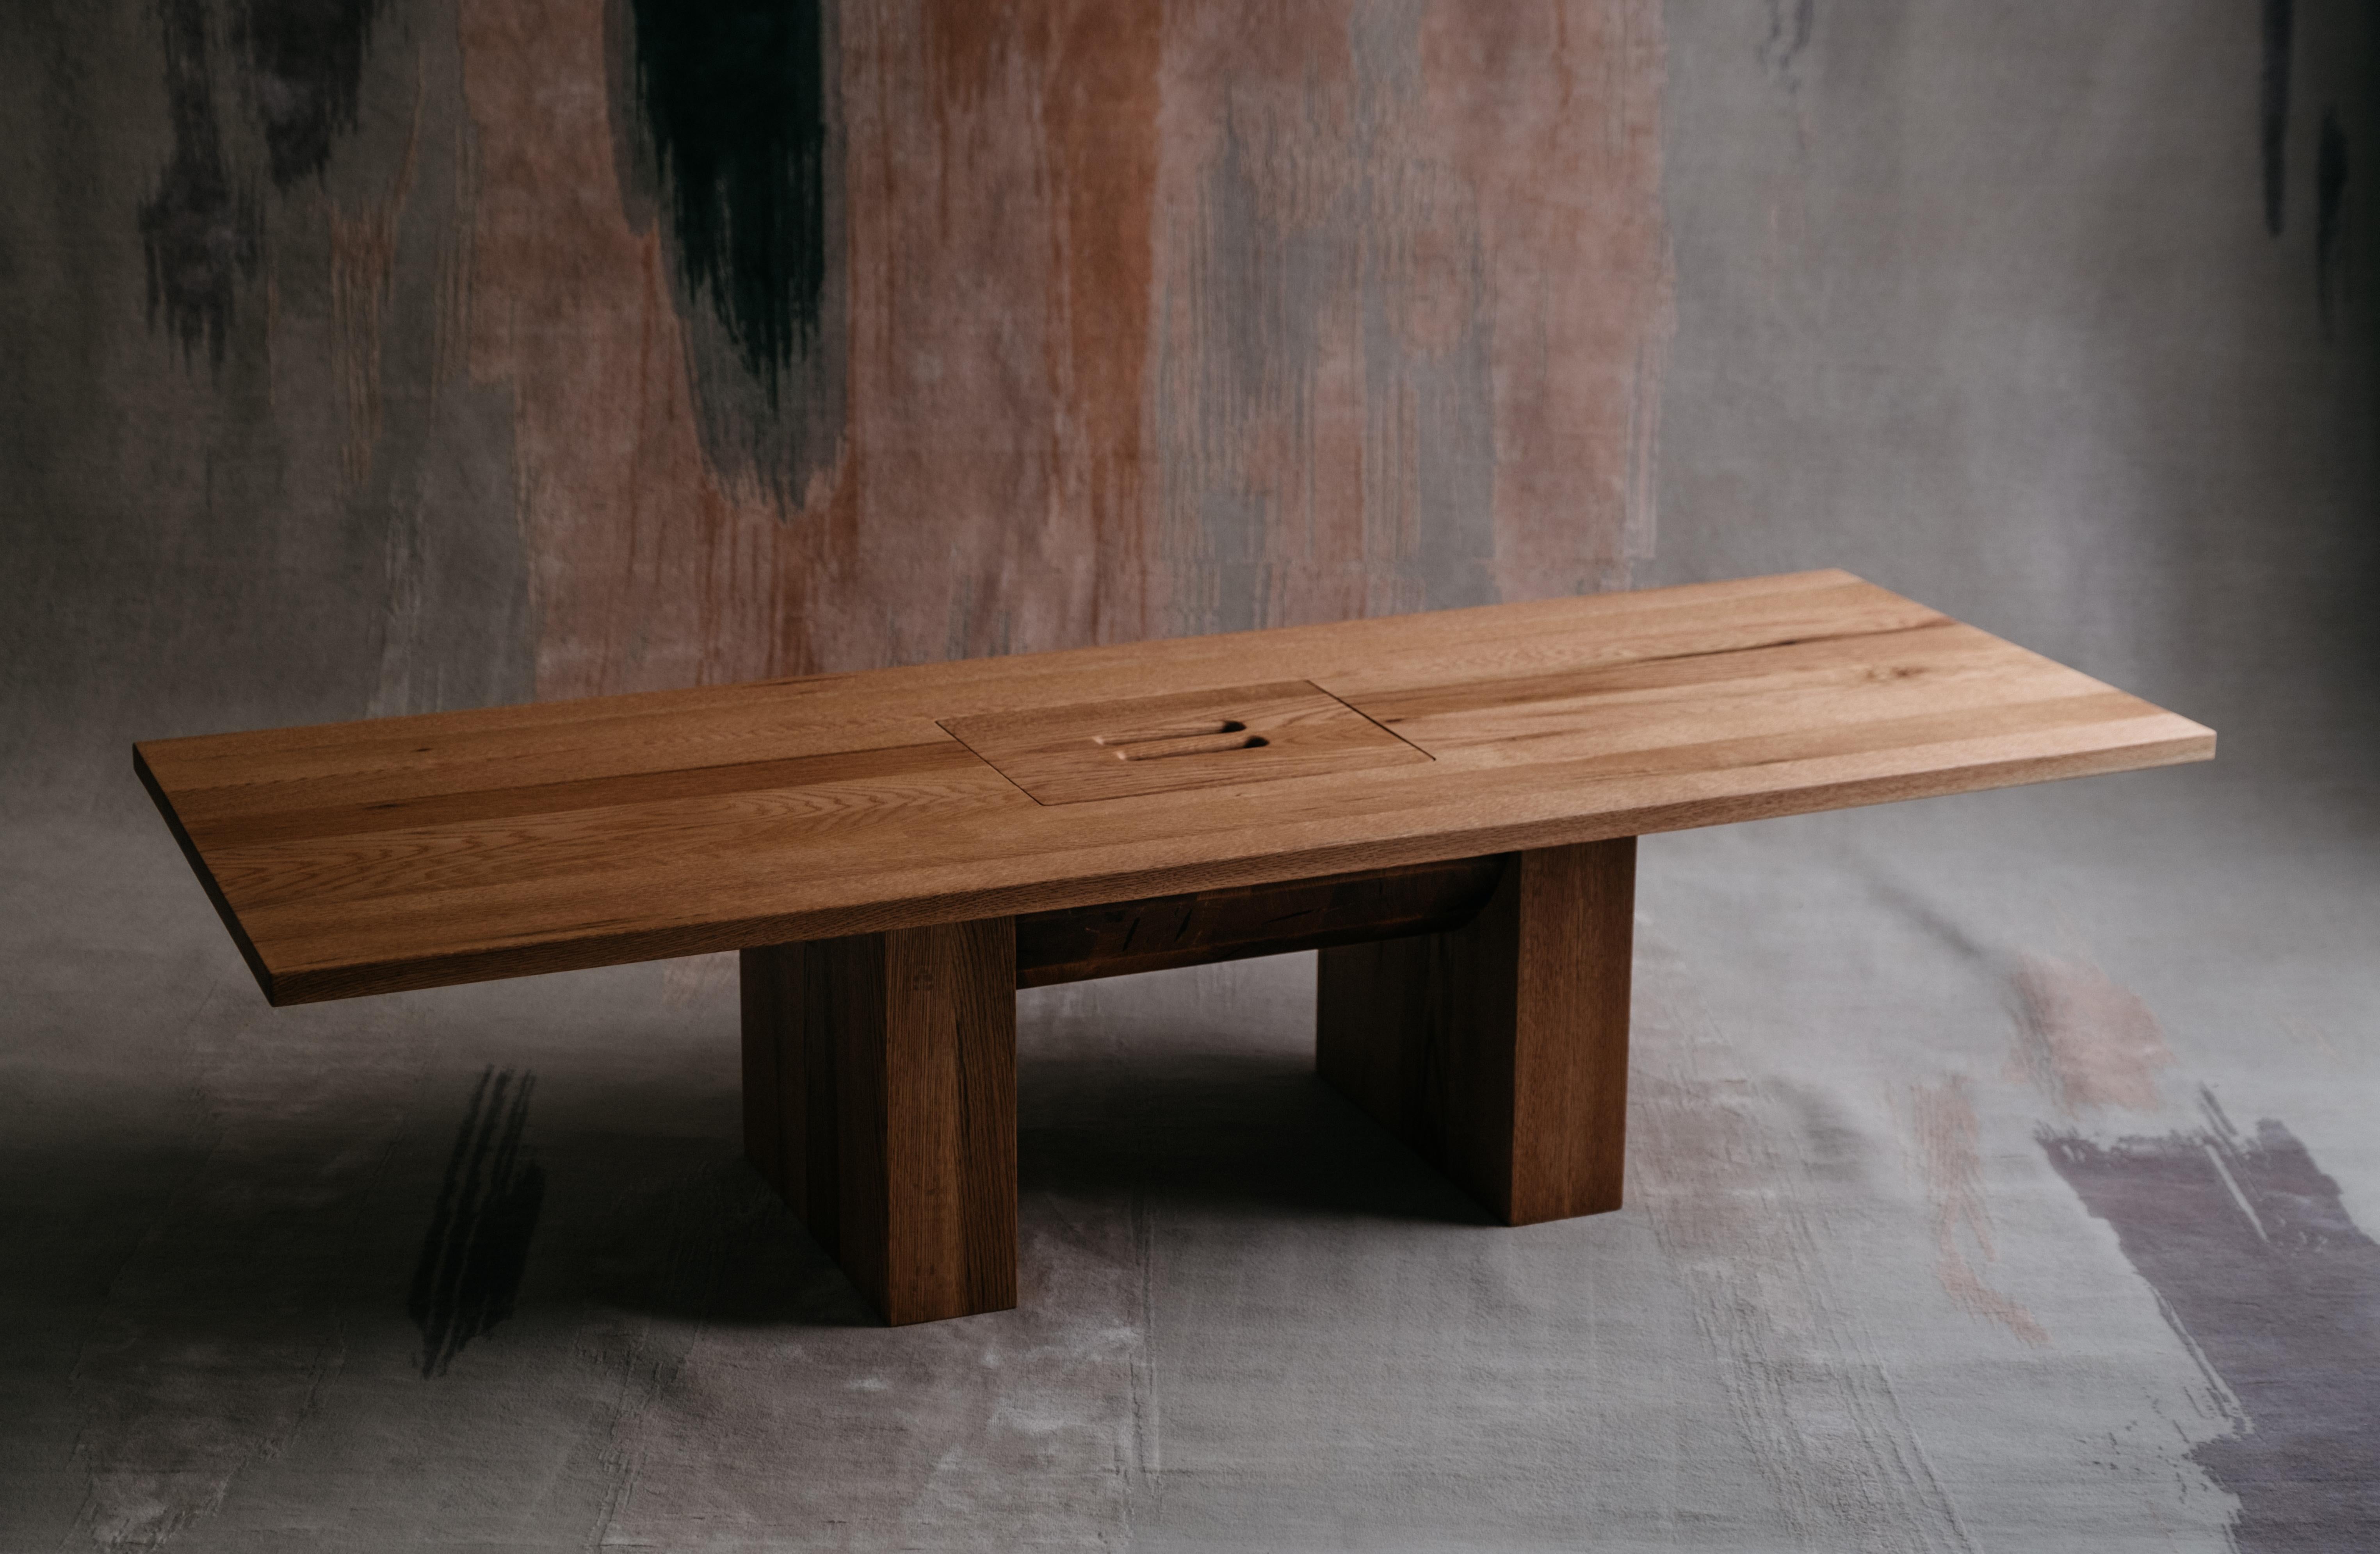 Red oak coffee table by Odami
Dimensions: L 63